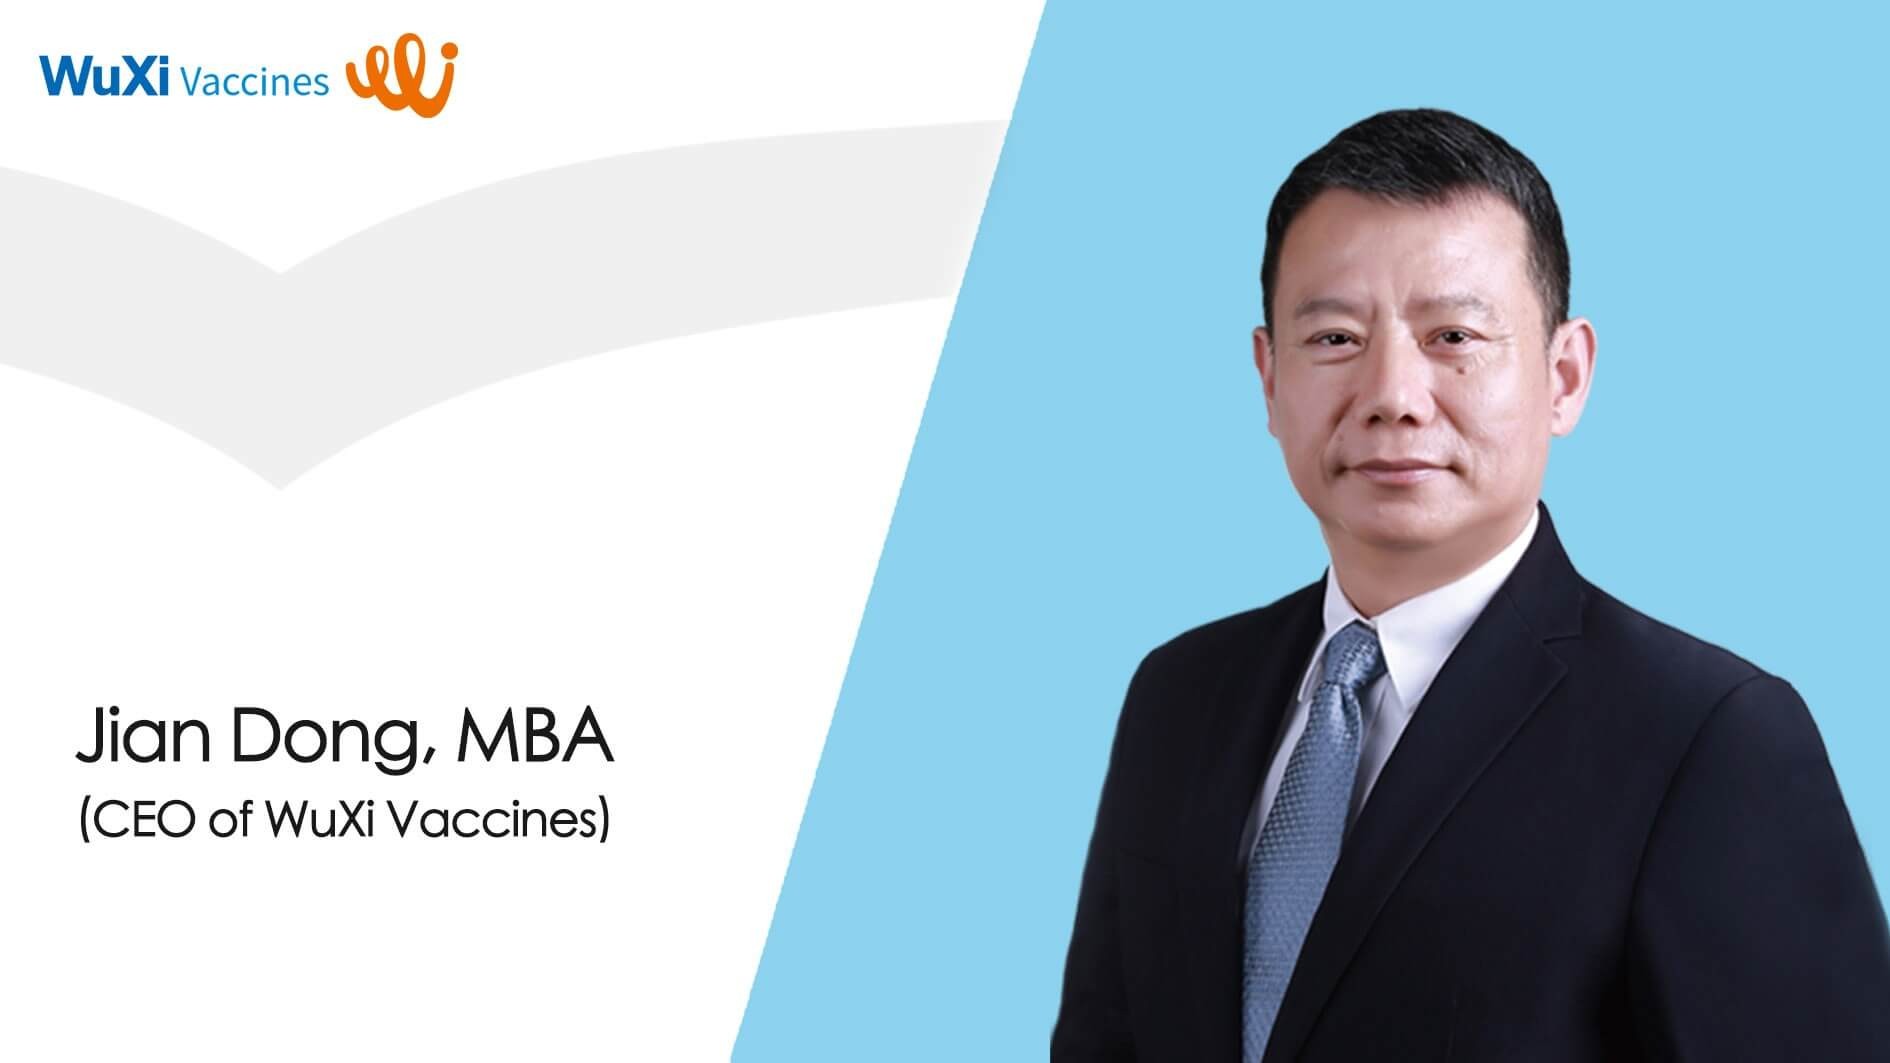 WuXi Vaccines Appoints Mr. Jian Dong as Chief Executive Officer